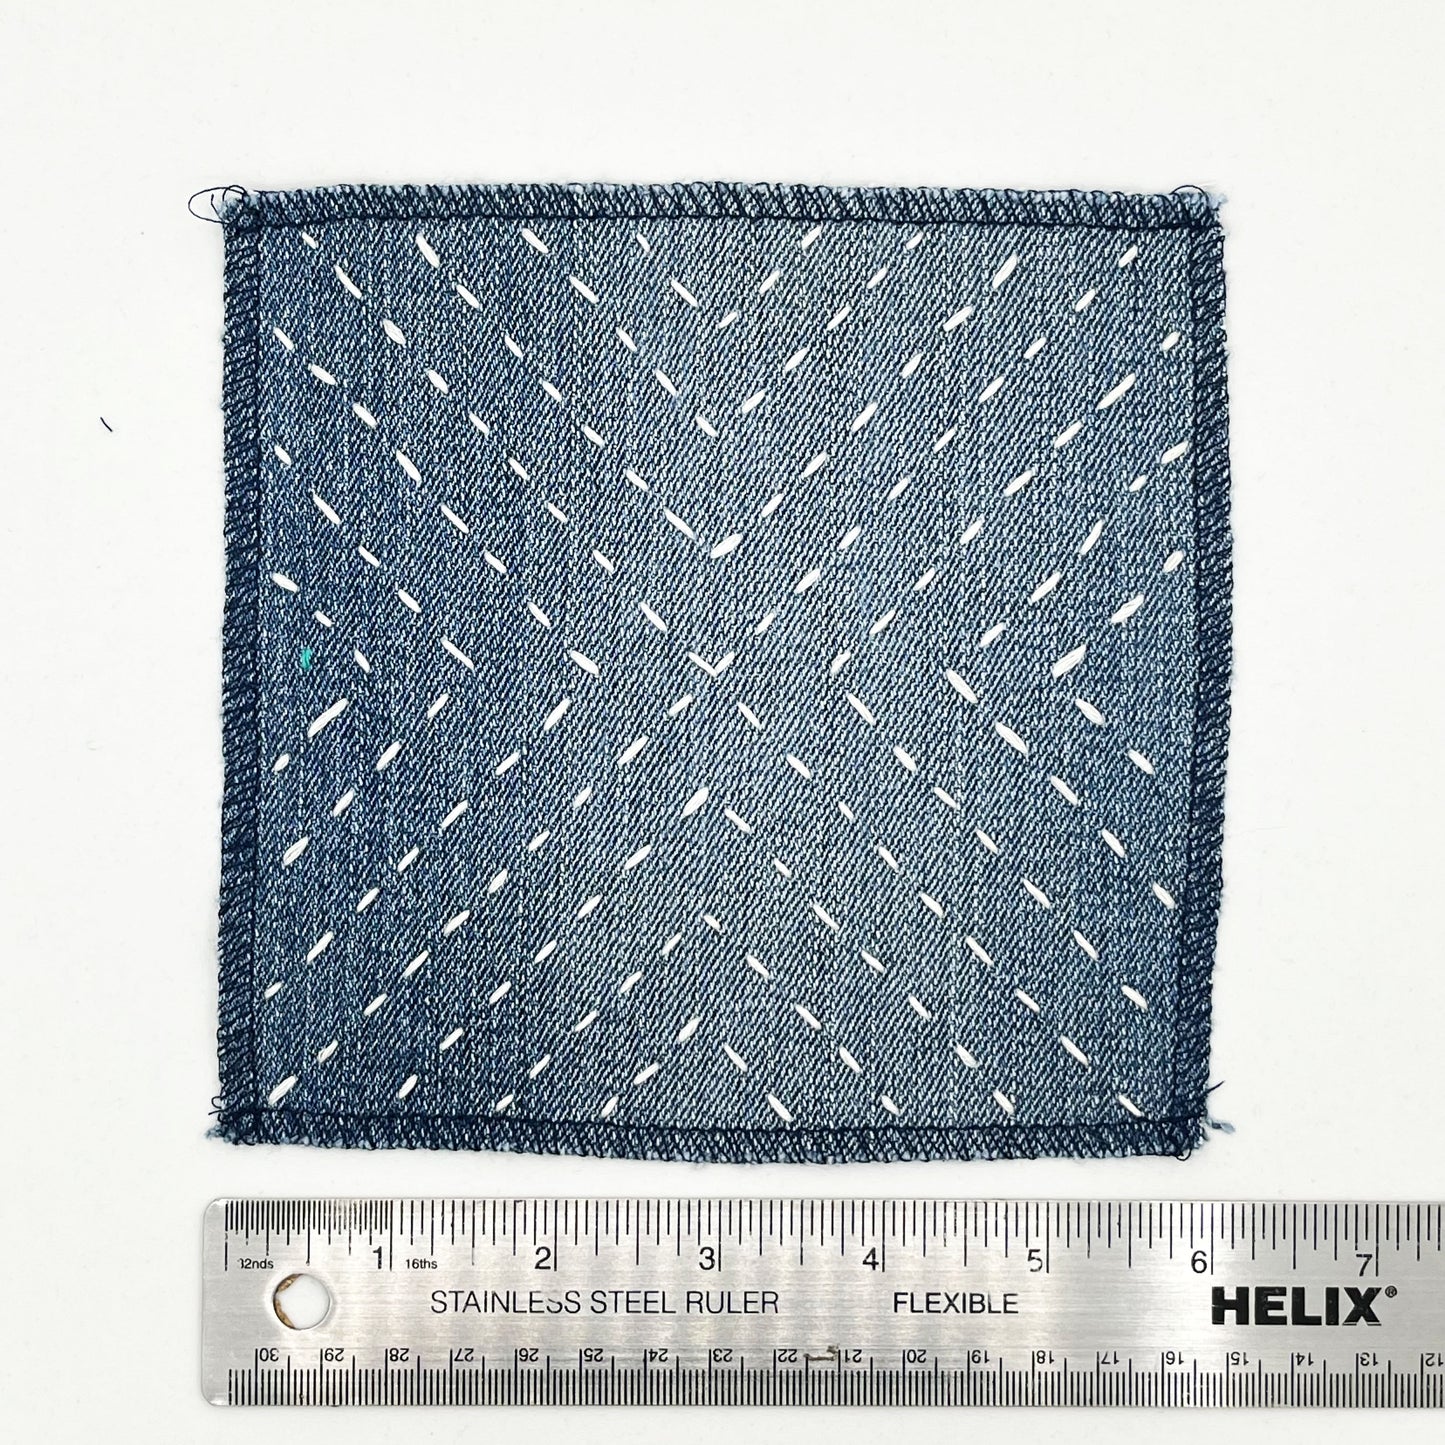 a square patch made out of denim, handstitched with ivory running stitches in a radiating X pattern, with overlocked edges, next to a metal ruler to show a width of 6 inches, on a white background